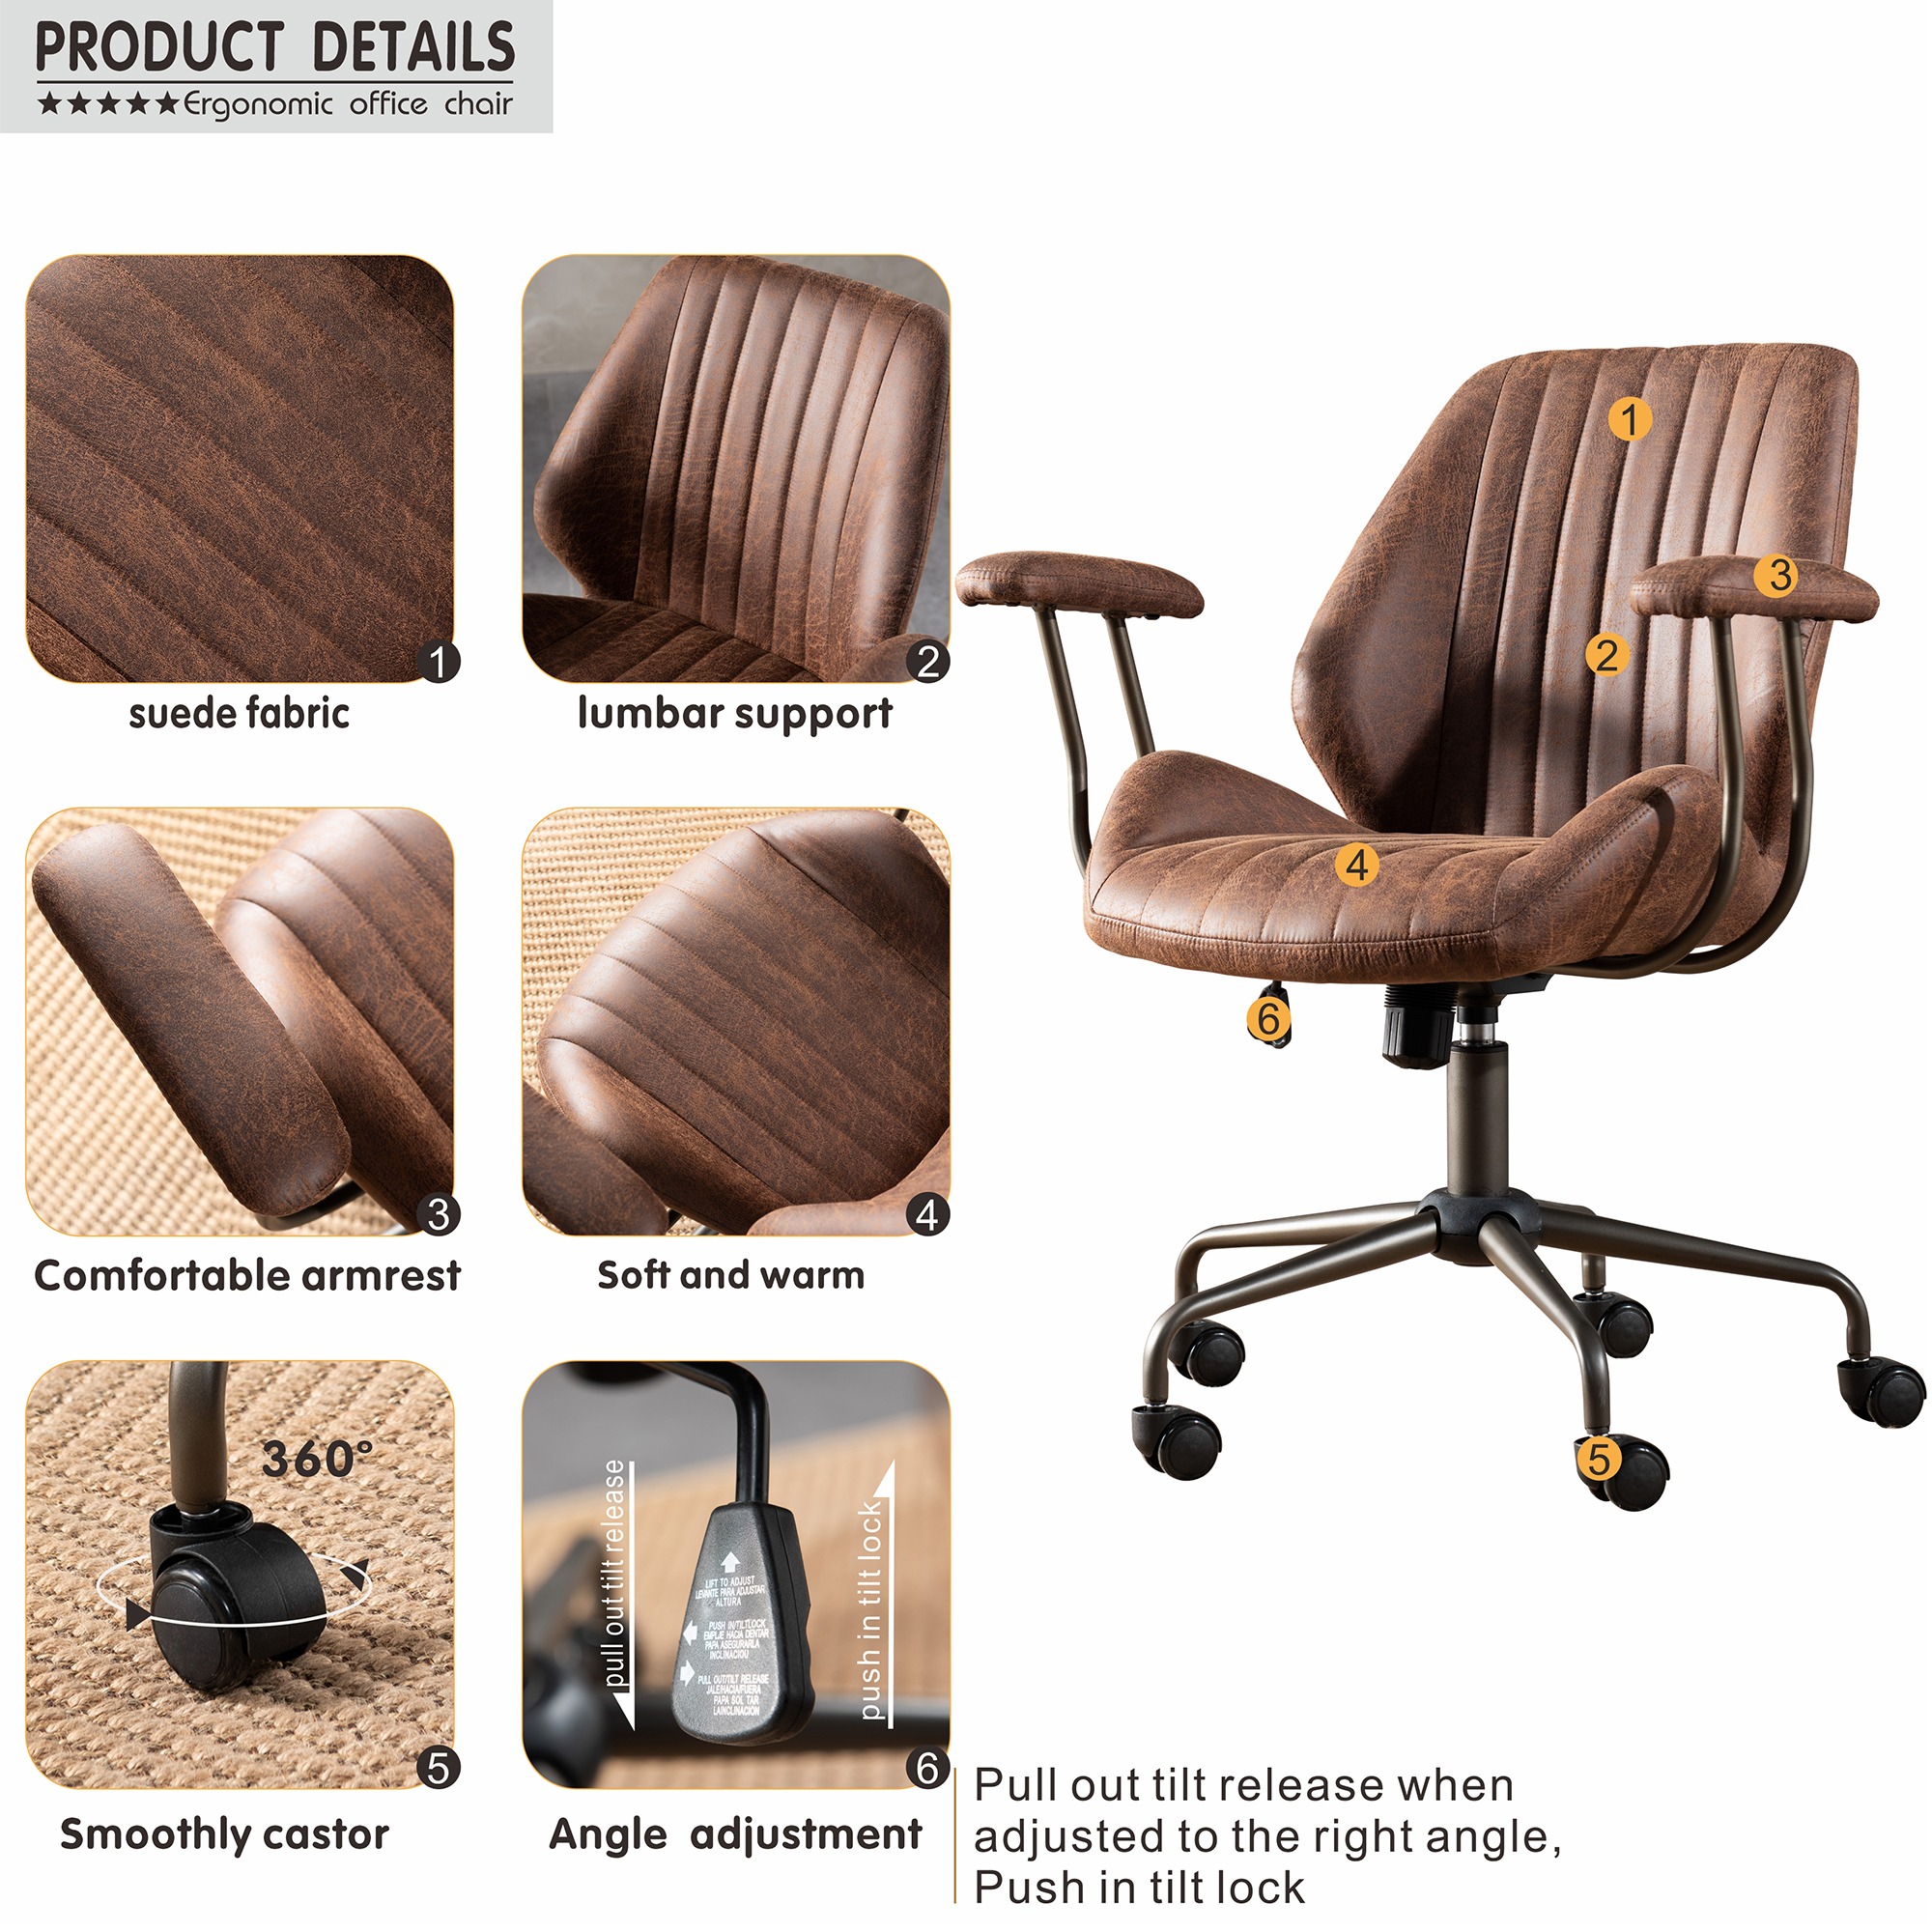 Ovios Ergonomic Office Chair Modern Computer Desk Suede Fabric Desk Chair with Lumbar Support for Home Office - image 4 of 8